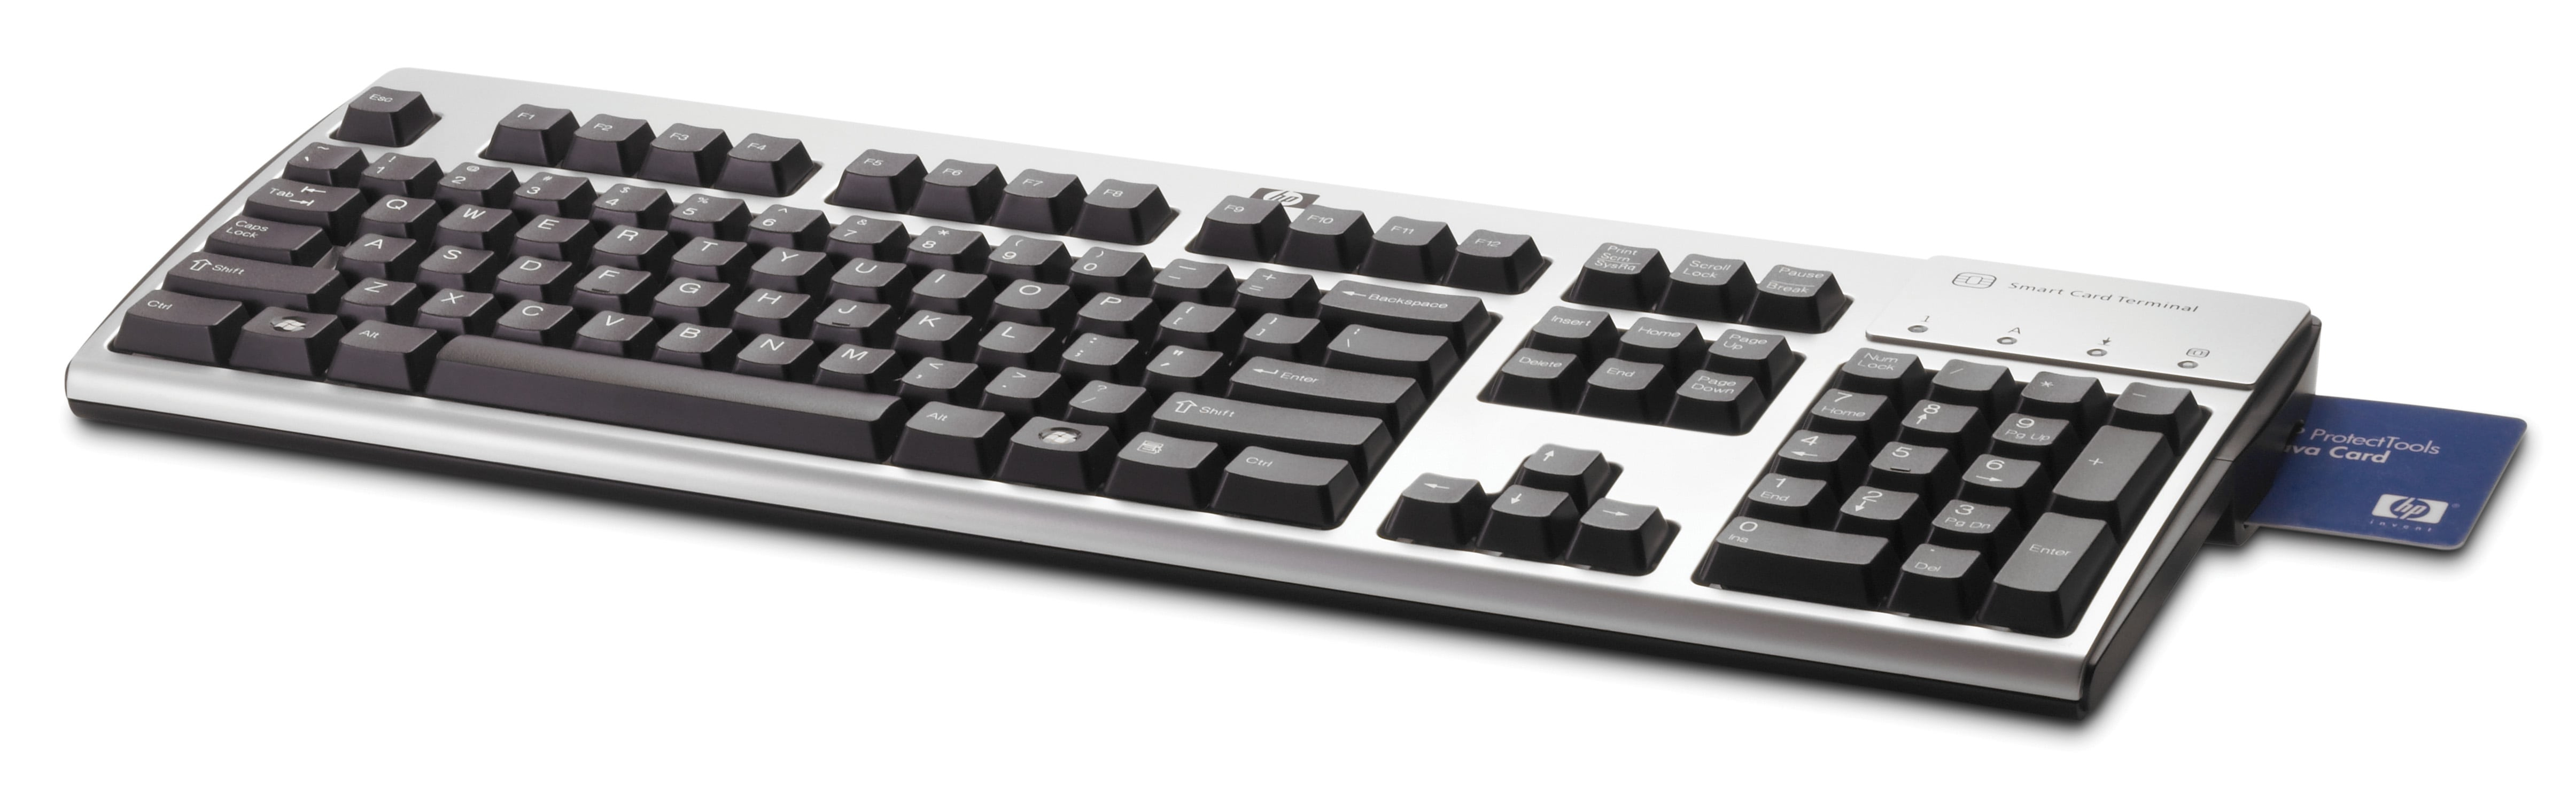 hp keyboard with smart card reader